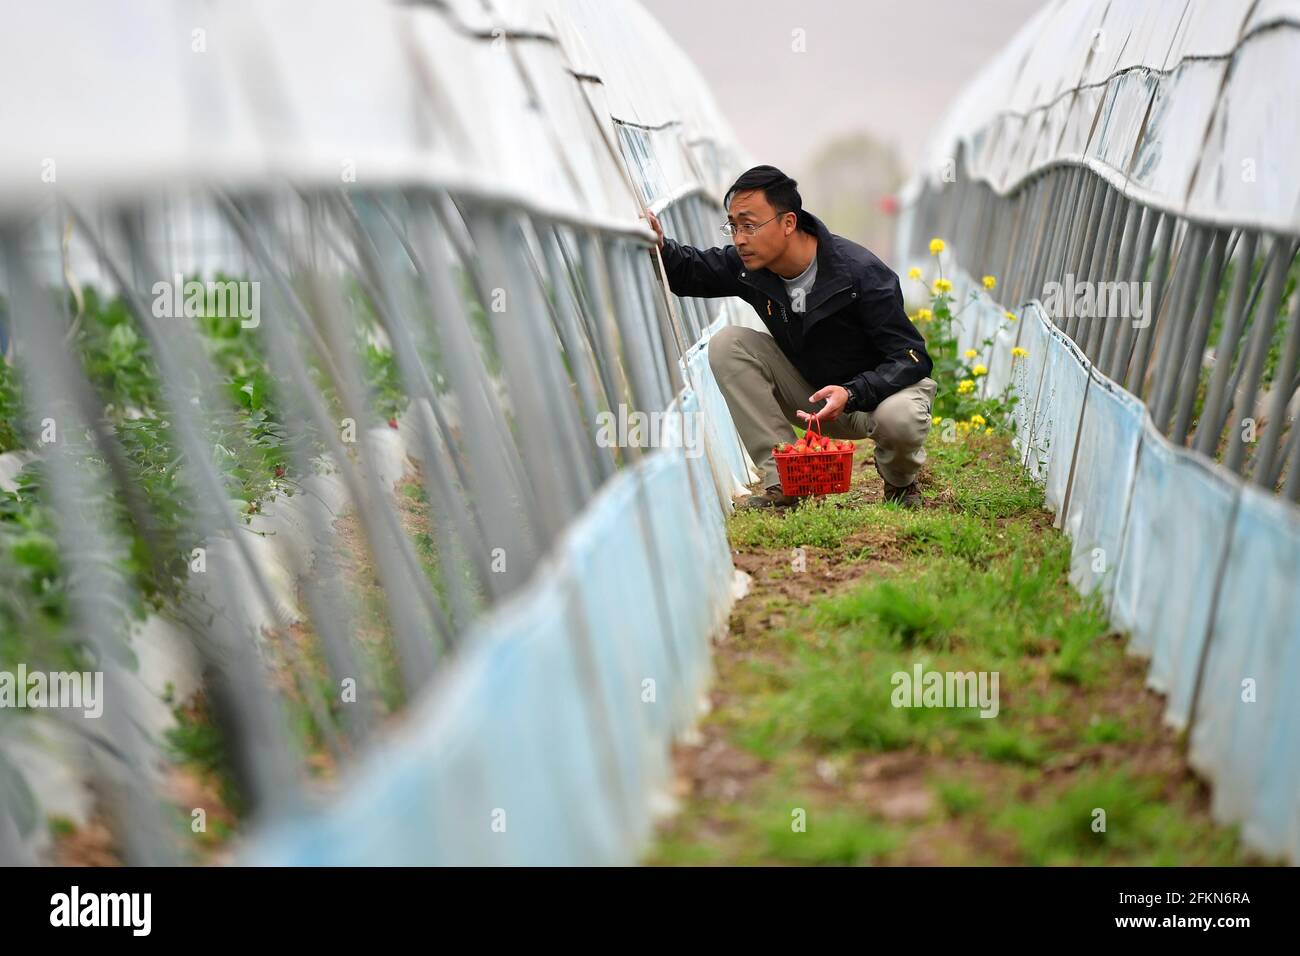 (210503) -- TIANSHUI, May 3, 2021 (Xinhua) -- Zhang Shuhao checks the growth of strawberries in Mudan Township, Tianshui City of northwest China's Gansu Province, on April 27, 2021. Zhang Shuhao, 42, quit his well-paid job three years ago to start an agriculture company with a few partners sharing the same vision at a mountainous village in Mudan Township, Tianshui City. In three years, Xinghuarong, Zhang's company, contracted 6,200 mu (about 413 hectares) of idle arable lands, where terraced fields, greenhouses, and a reservoir have been built to grow diverse produces ranging from traditiona Stock Photo